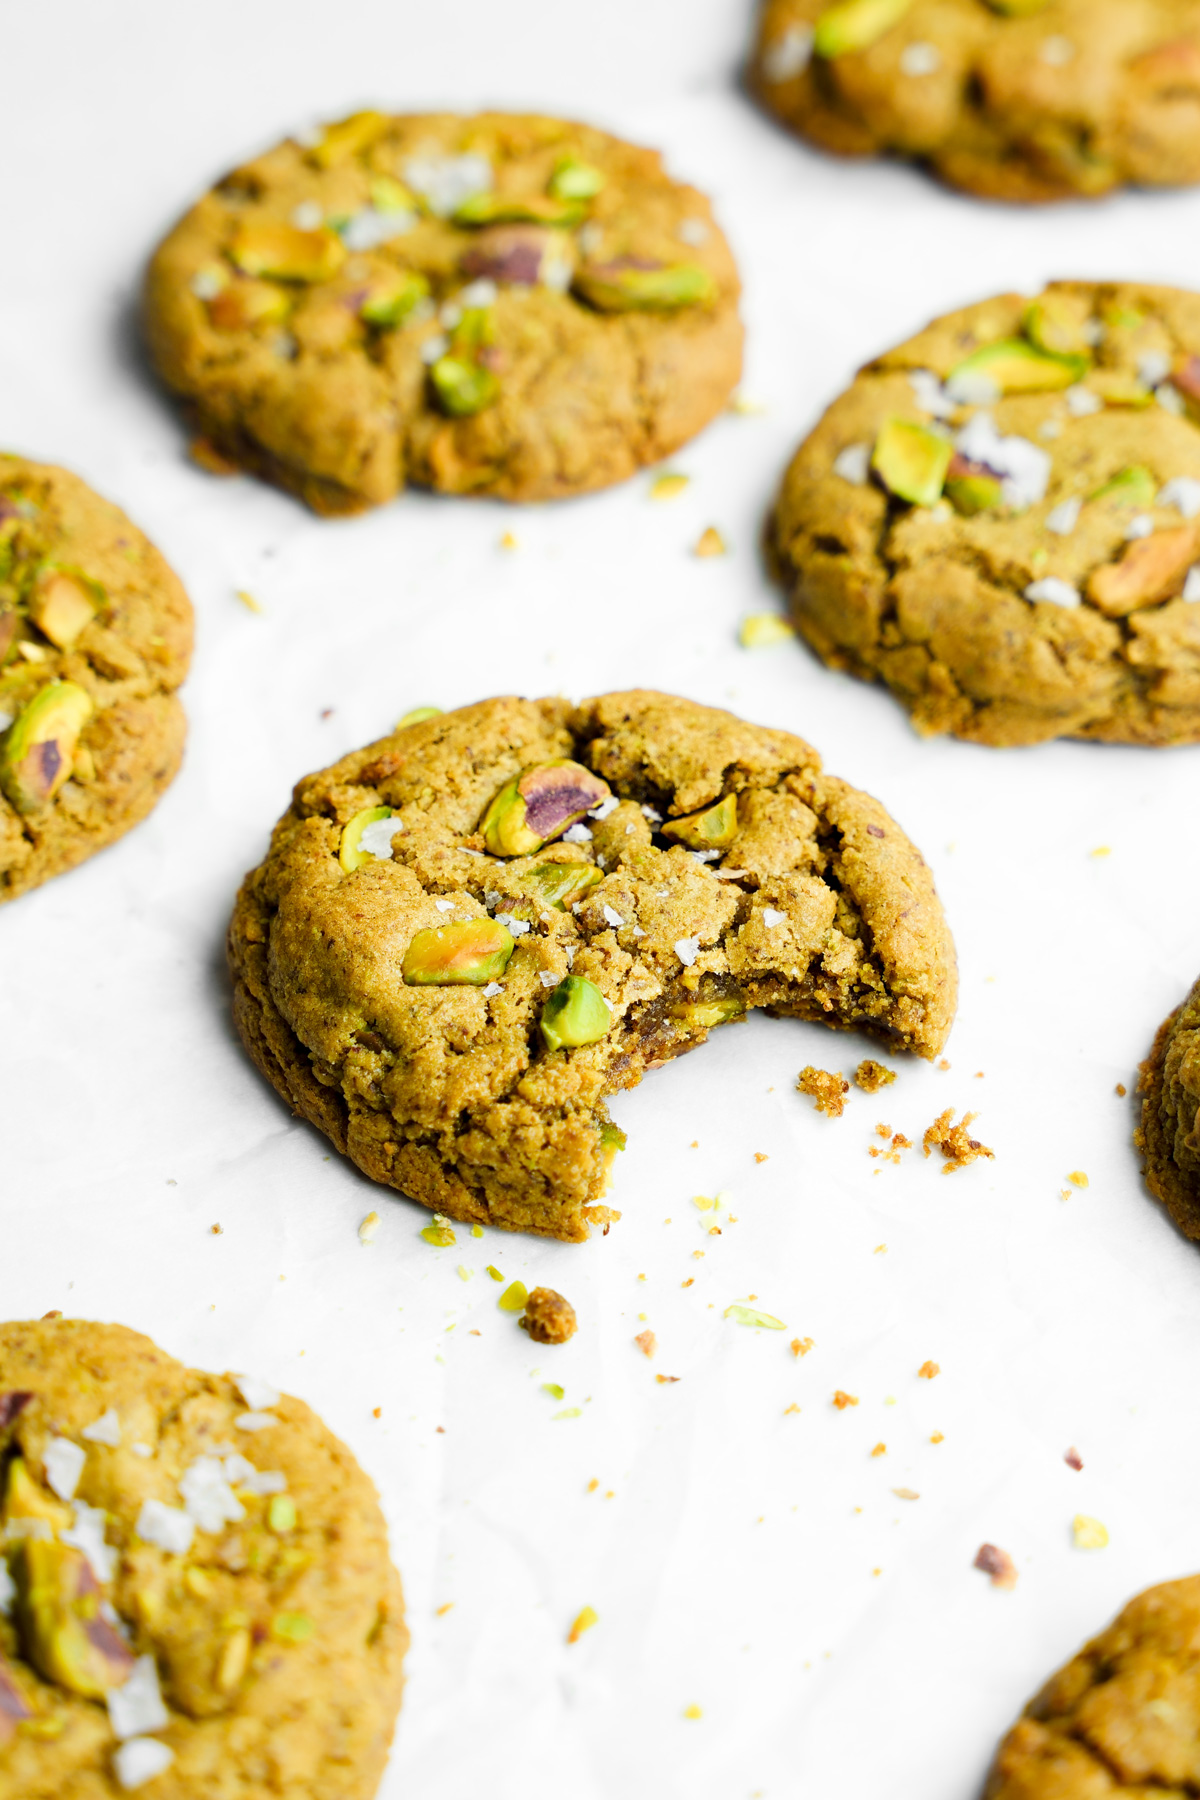 a close up of the vegan pistachio cookies with a bite taken out of it to show the creamy texture